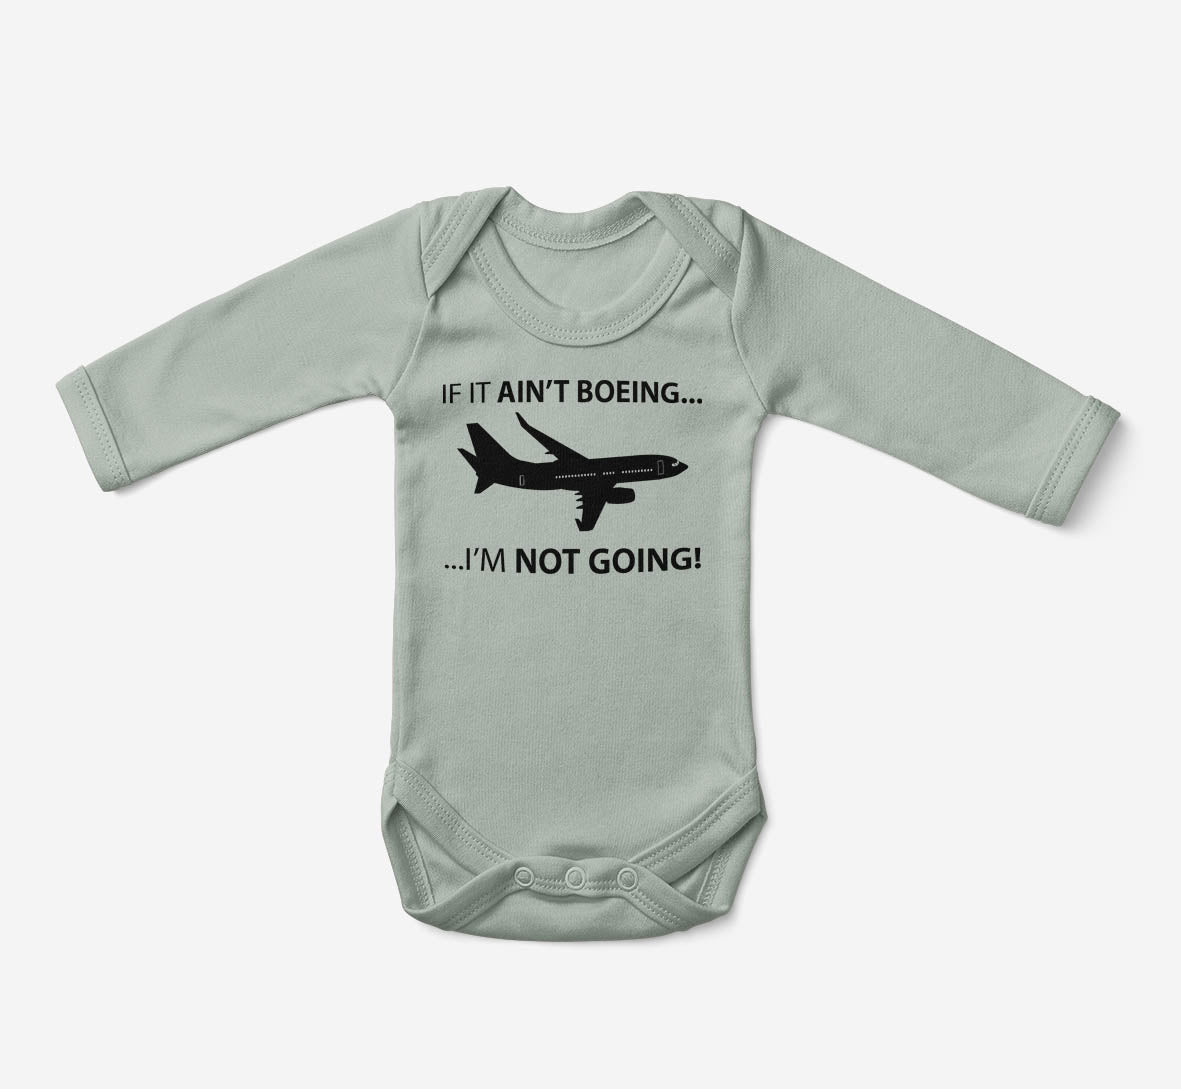 If It Ain't Boeing I'm Not Going! Designed Baby Bodysuits